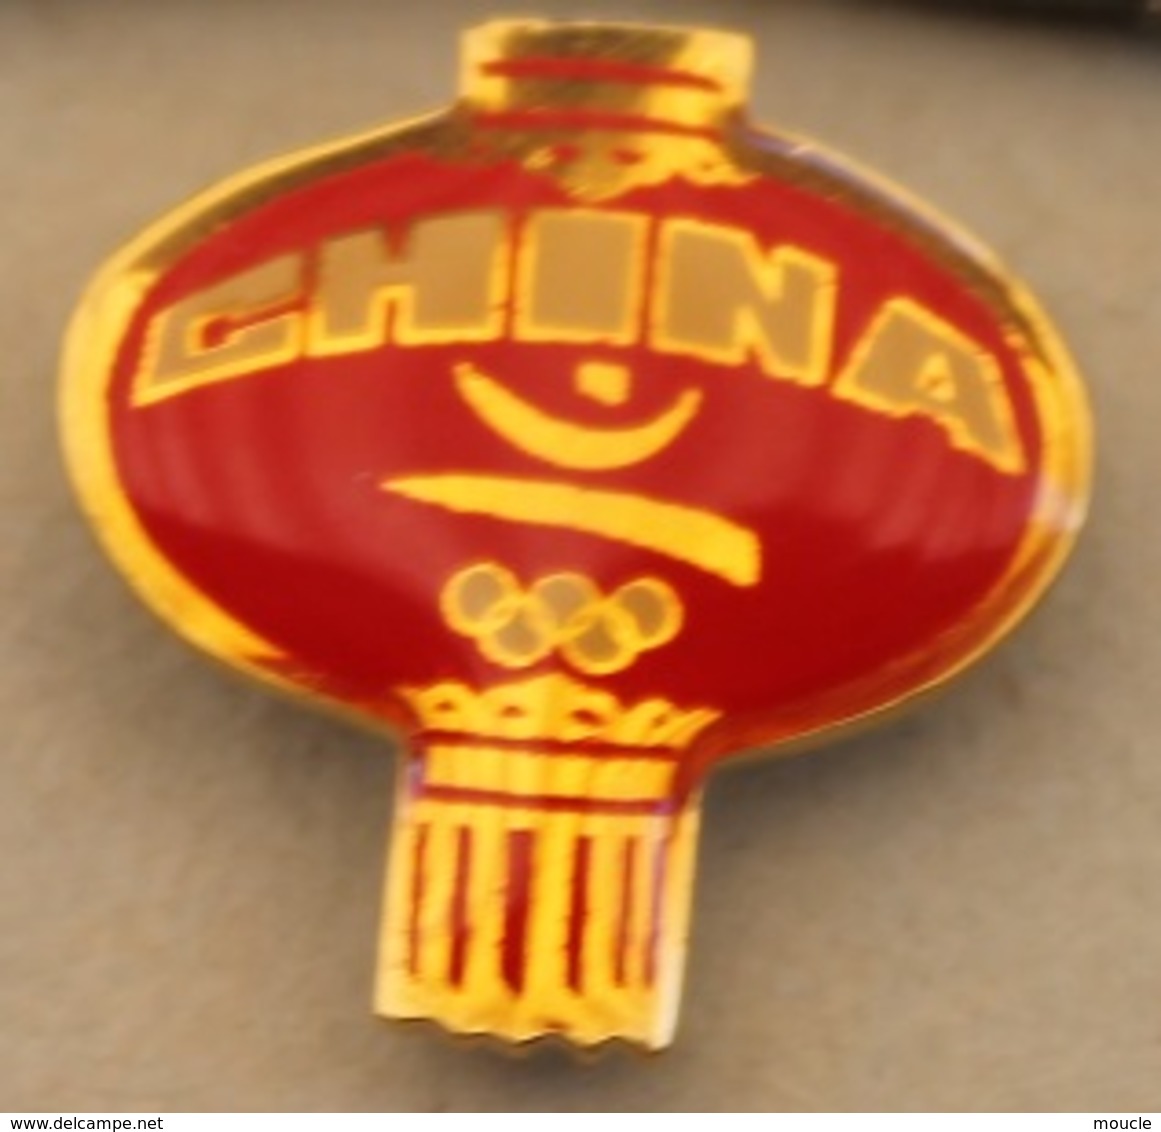 JEUX OLYMPIQUES  - TEAM CHINA - EQUIPE DE CHINE - COMITE OLYMPIQUE - BARCELONA 92   -      (20) - Olympic Games